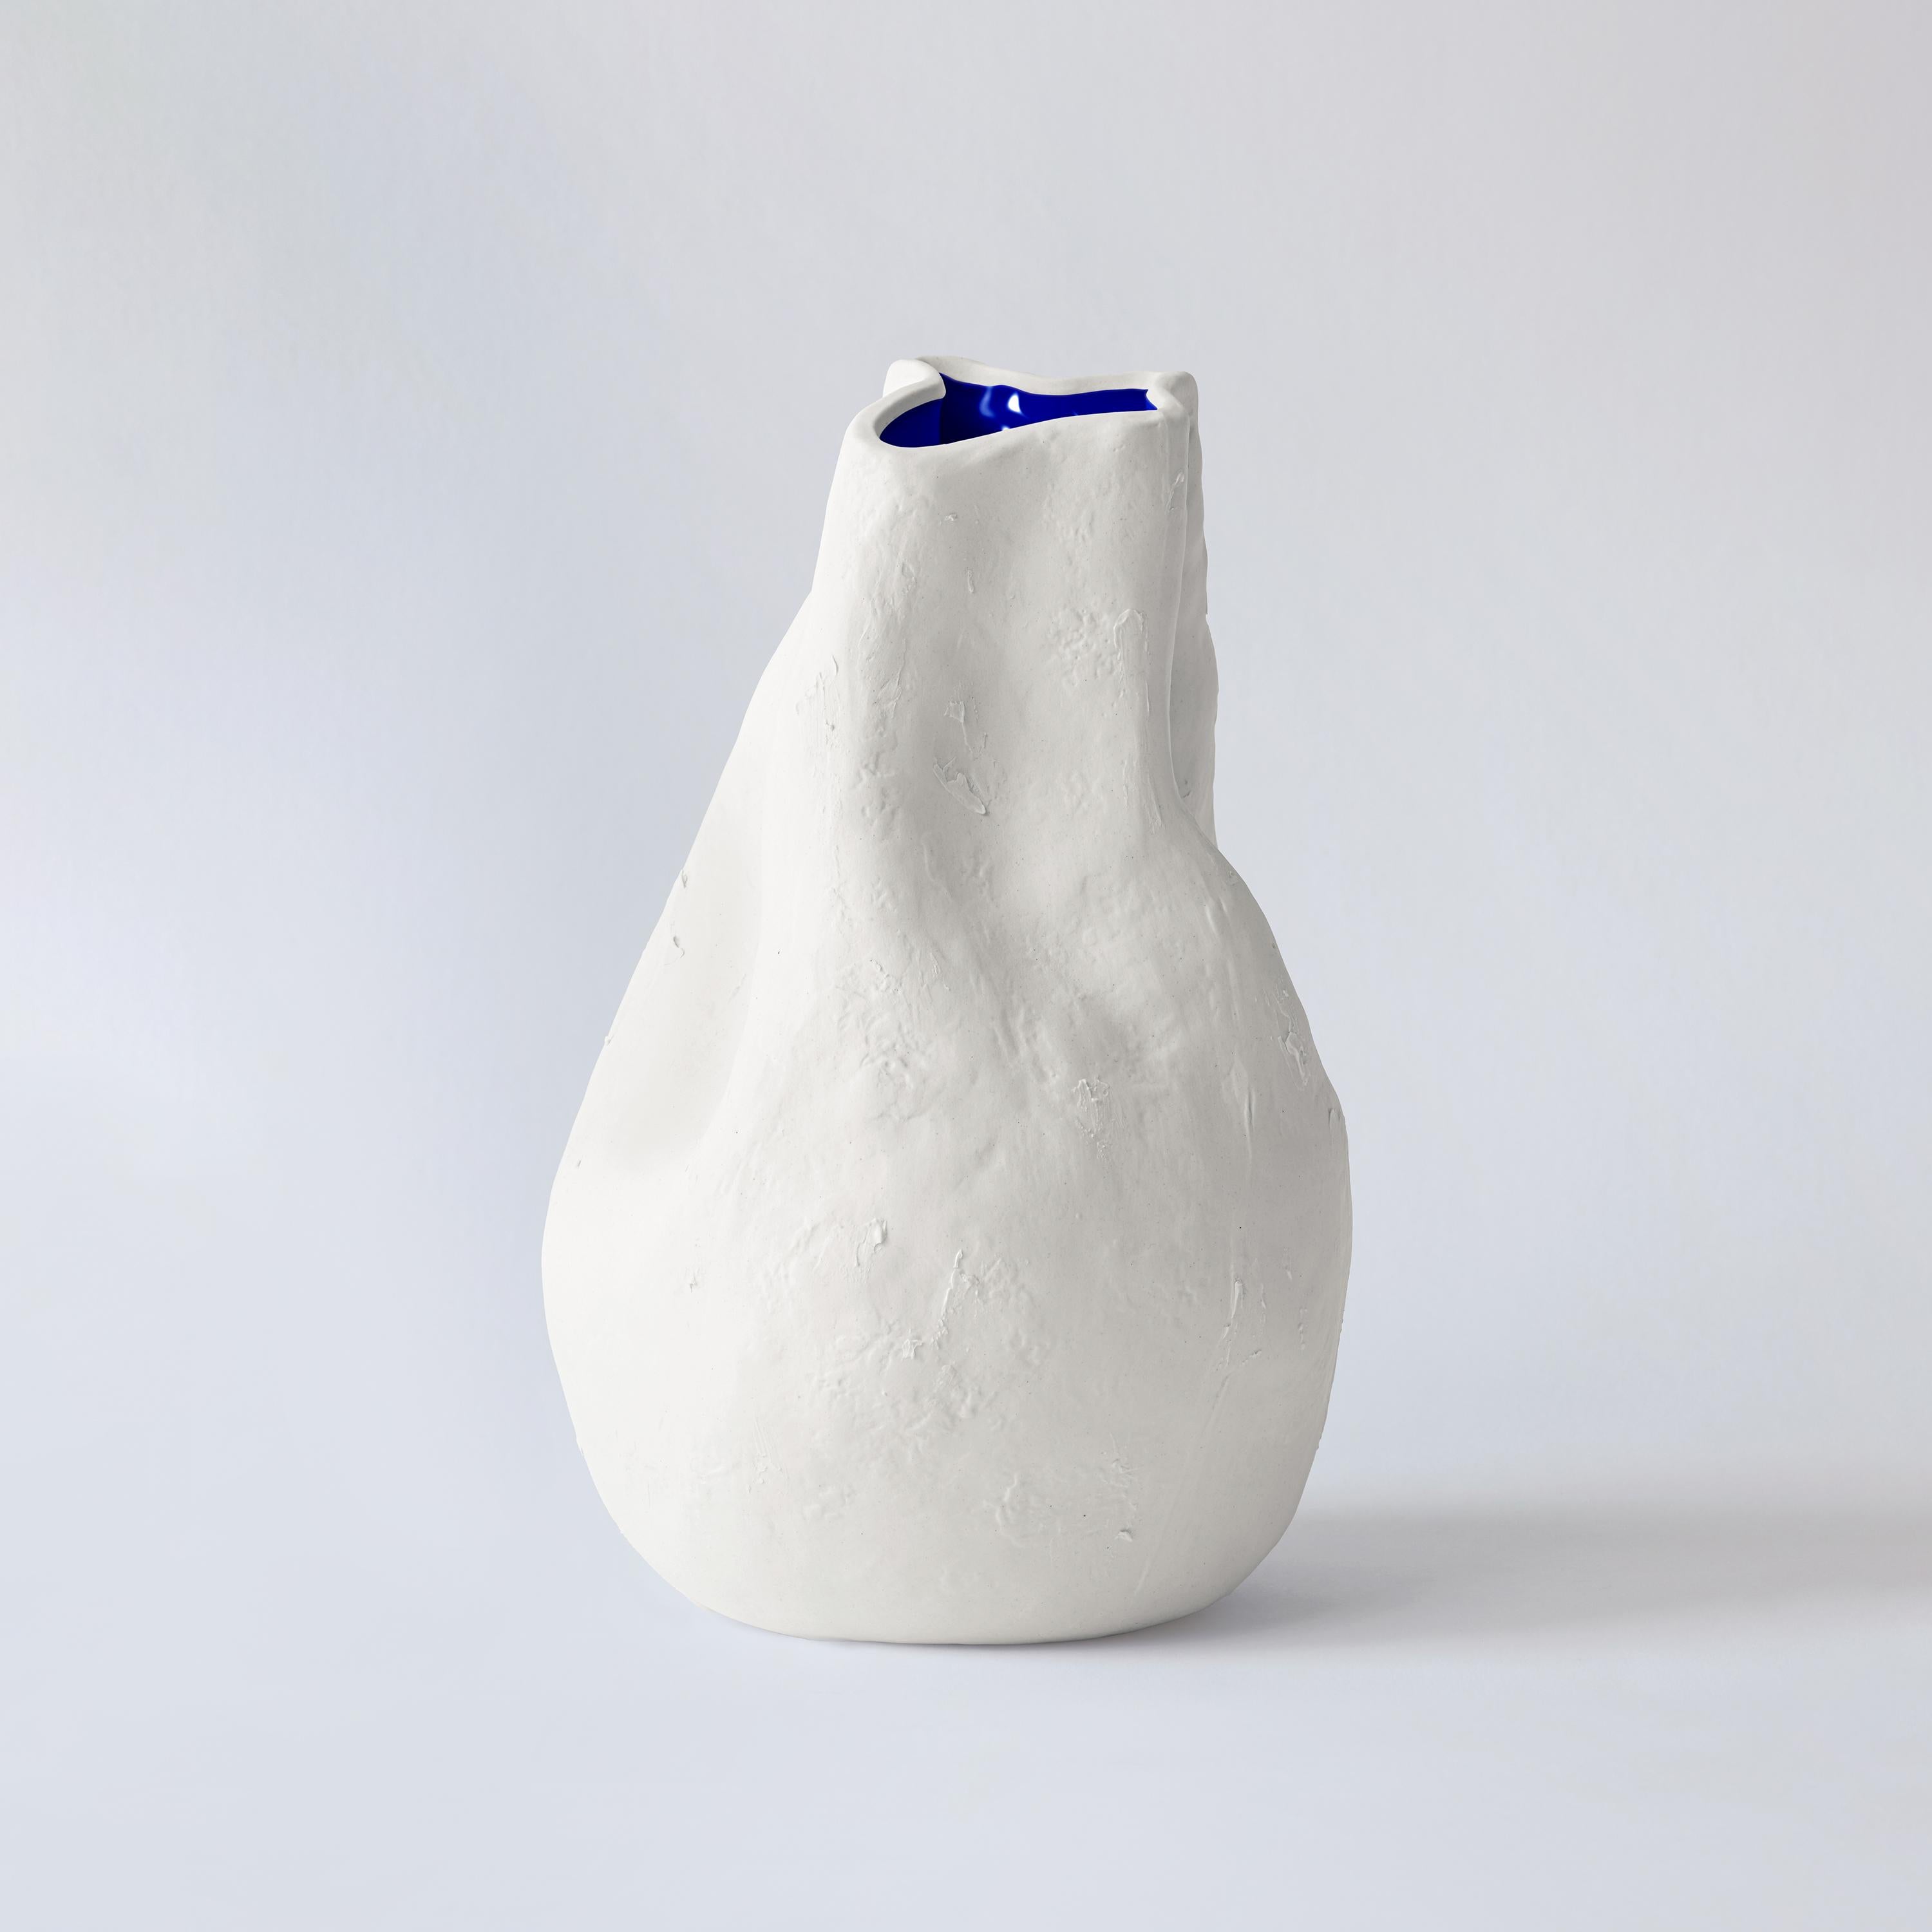 This porcelain hand-crafted vase from The Vibrant Touch Collection features a unique, tactile surface with a textured unglazed finish that invites touch. The design is characterized by a fluid, organic form that culminates in an elegantly irregular